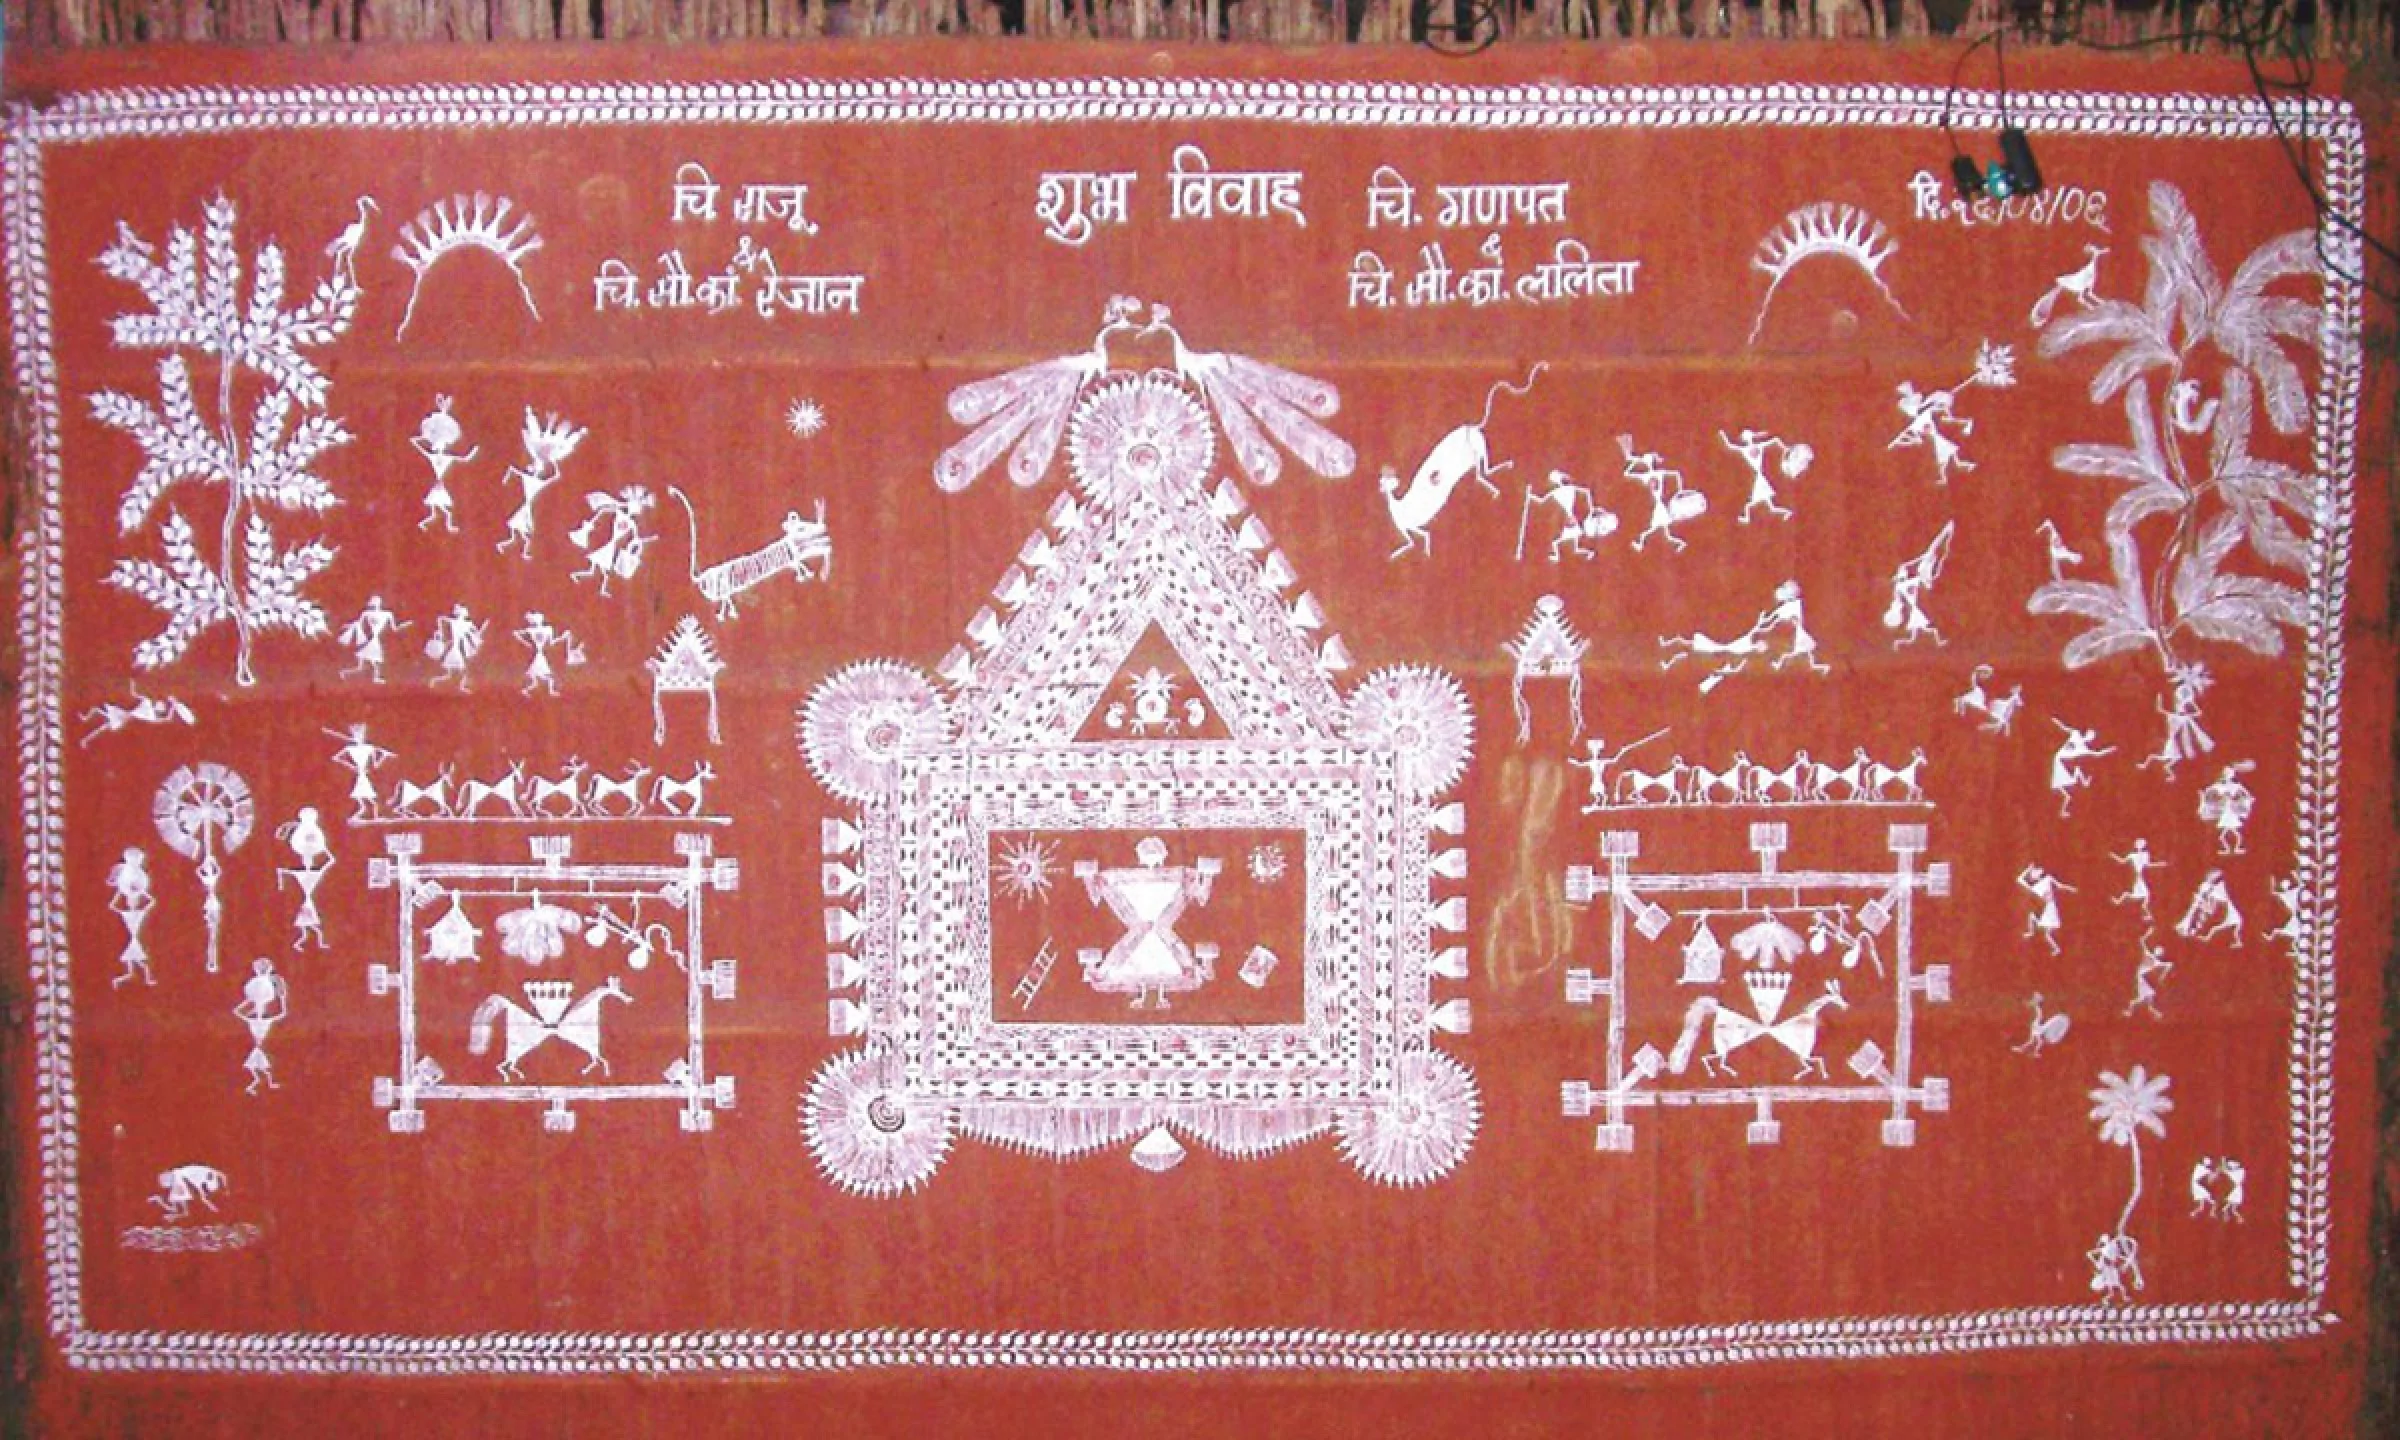 A traditional Warli painting done in white over a red ochre background. Panchasiriya is in the dev chauk on both sides of the lagna chauk in the centre.